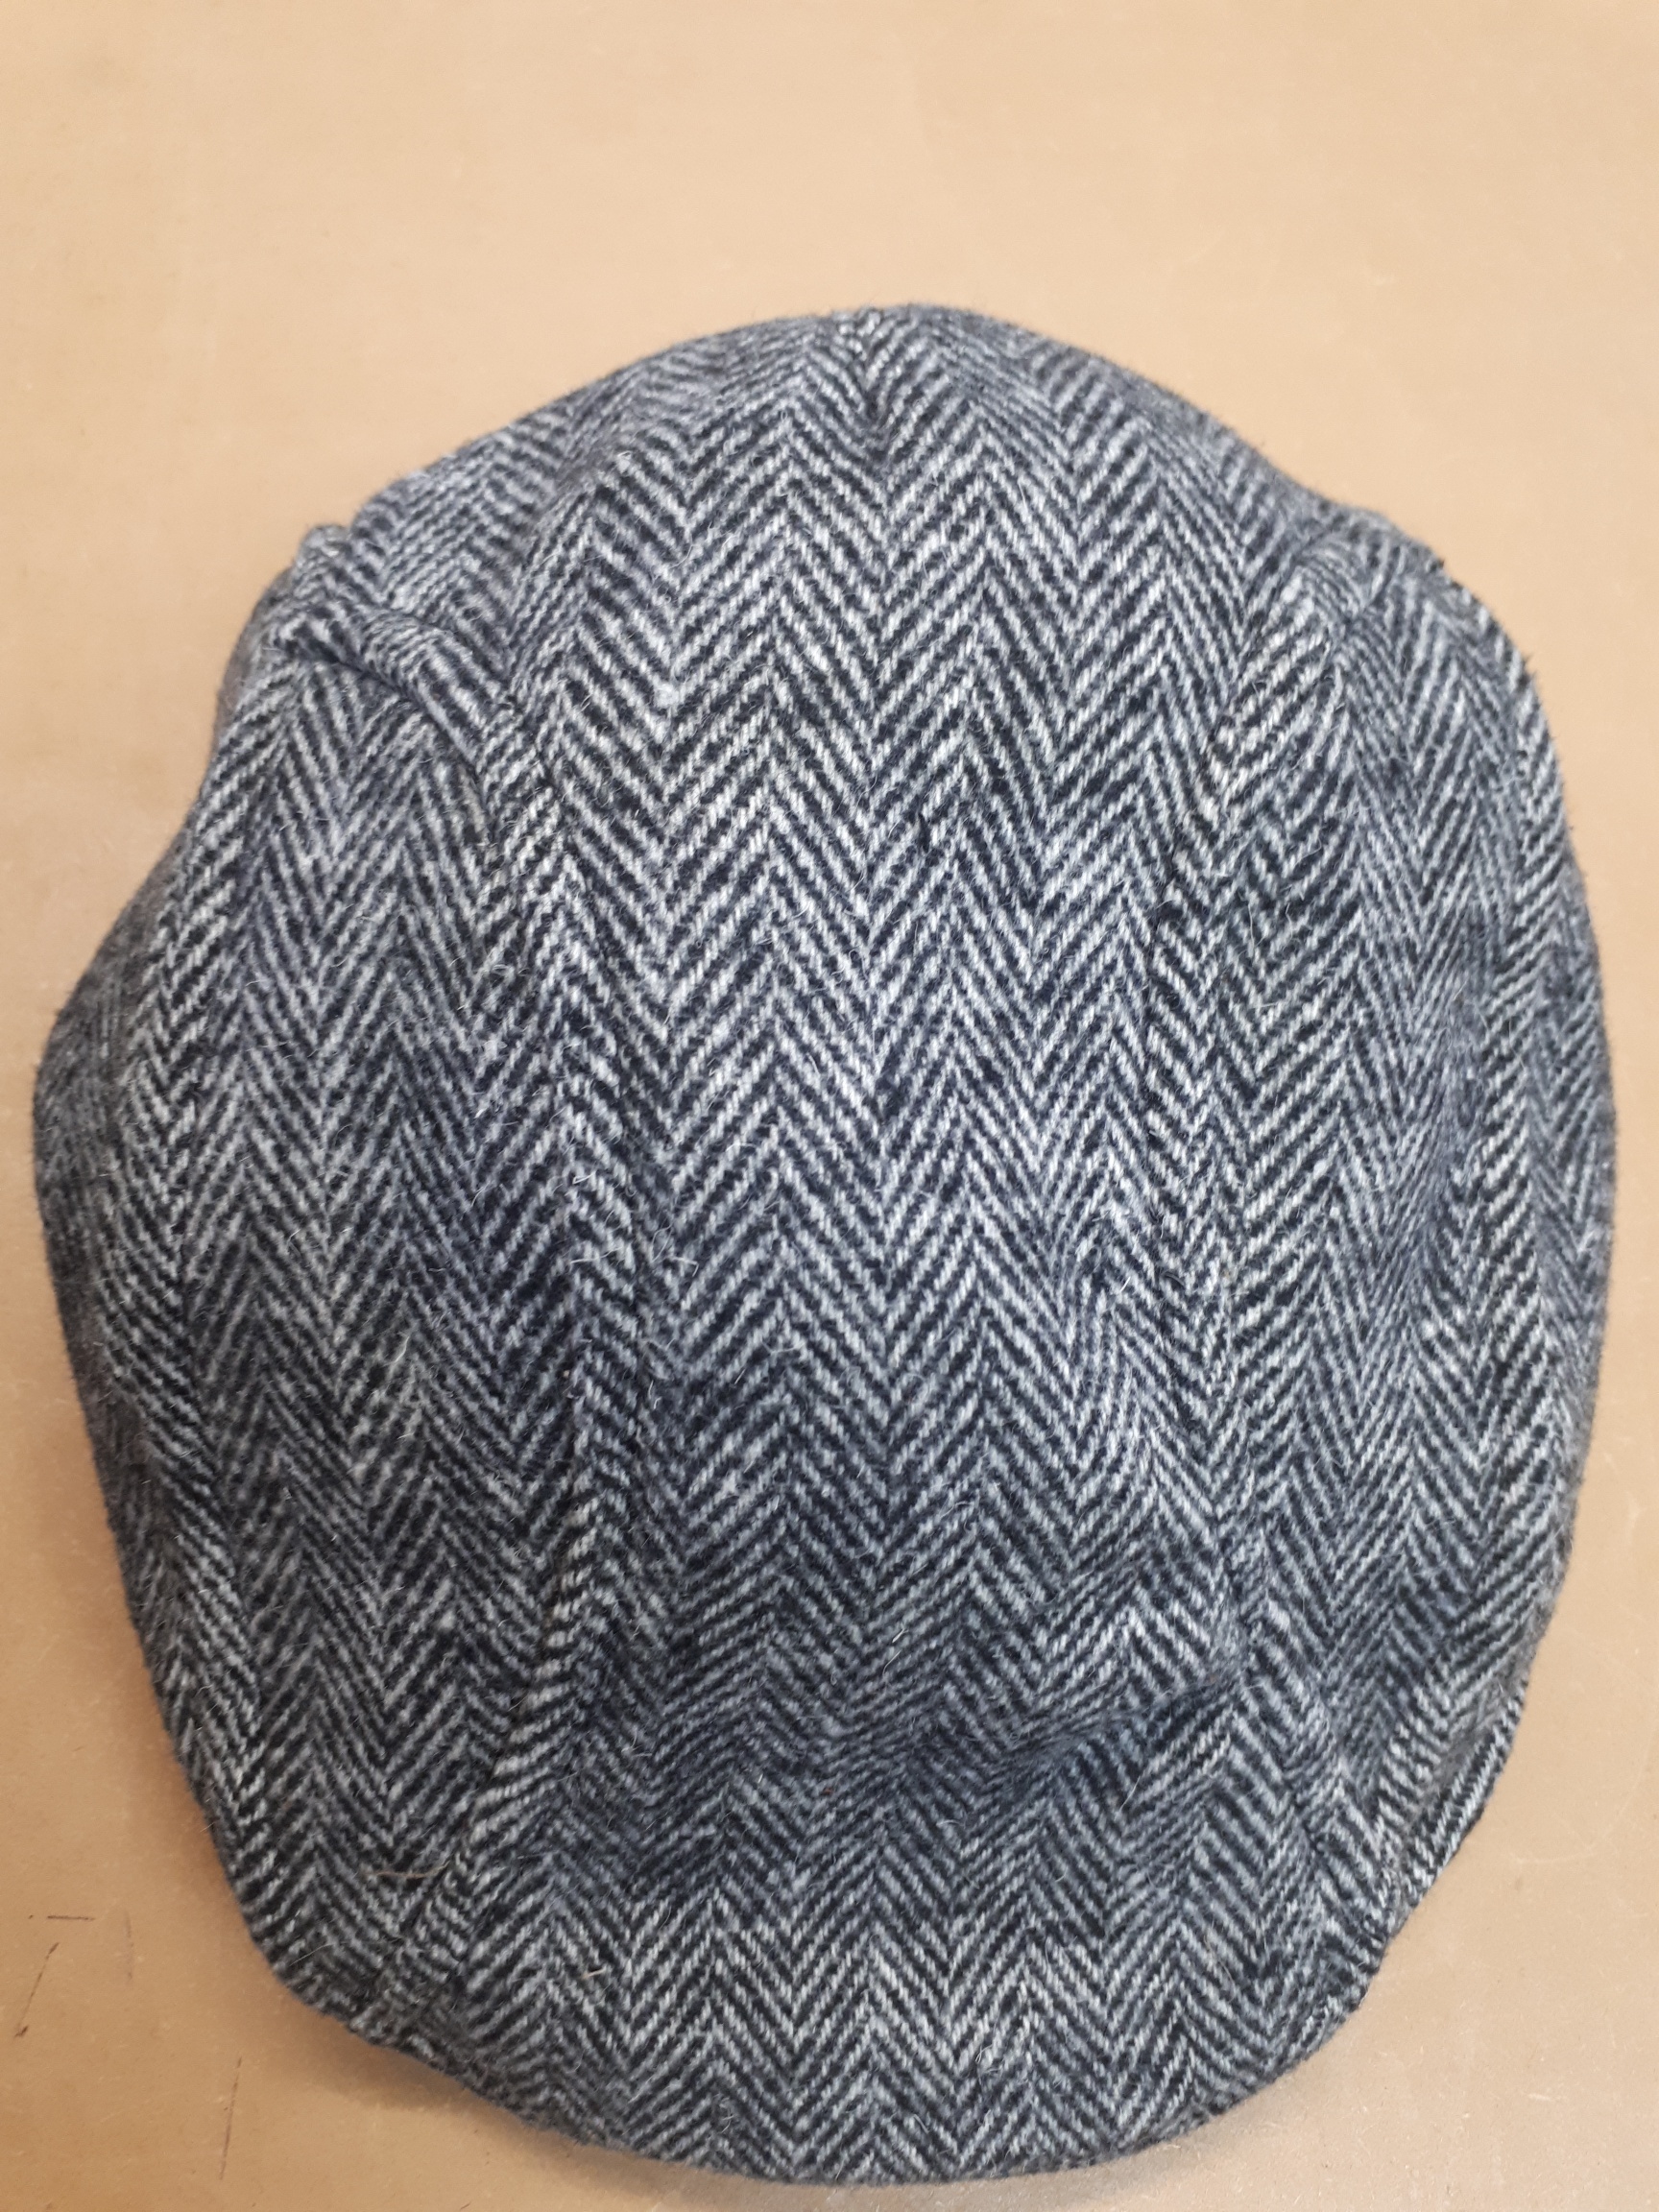 Woollen Cap - Selke NZ high quality handcrafted leather & fabric hats